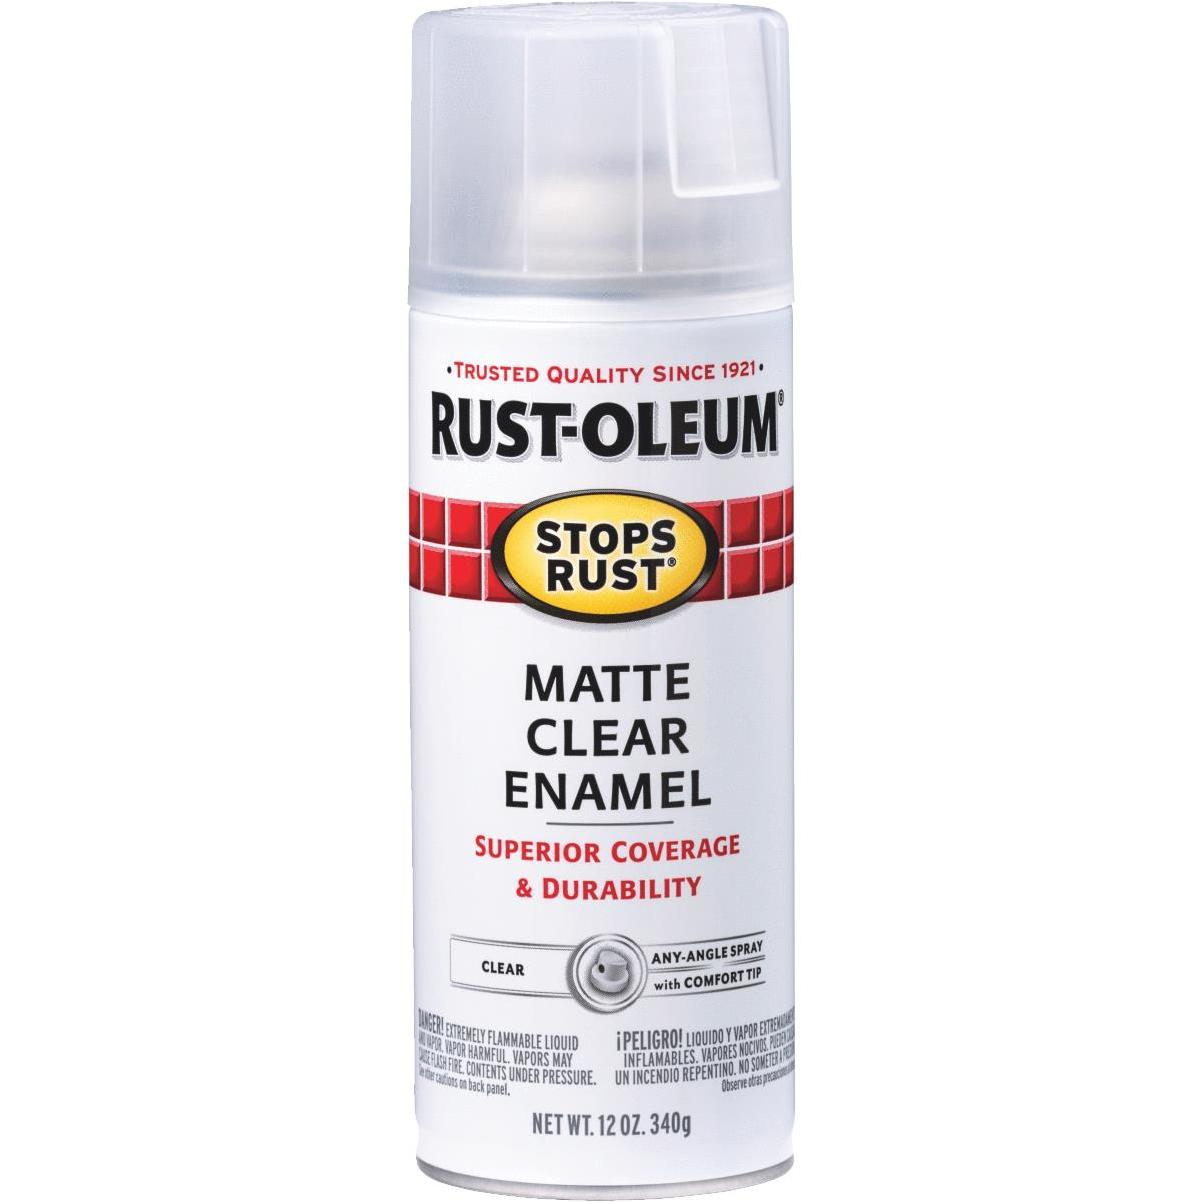 Rust-Oleum Camouflage 2X Ultra Cover 12 Oz. Flat Spray Paint, Army